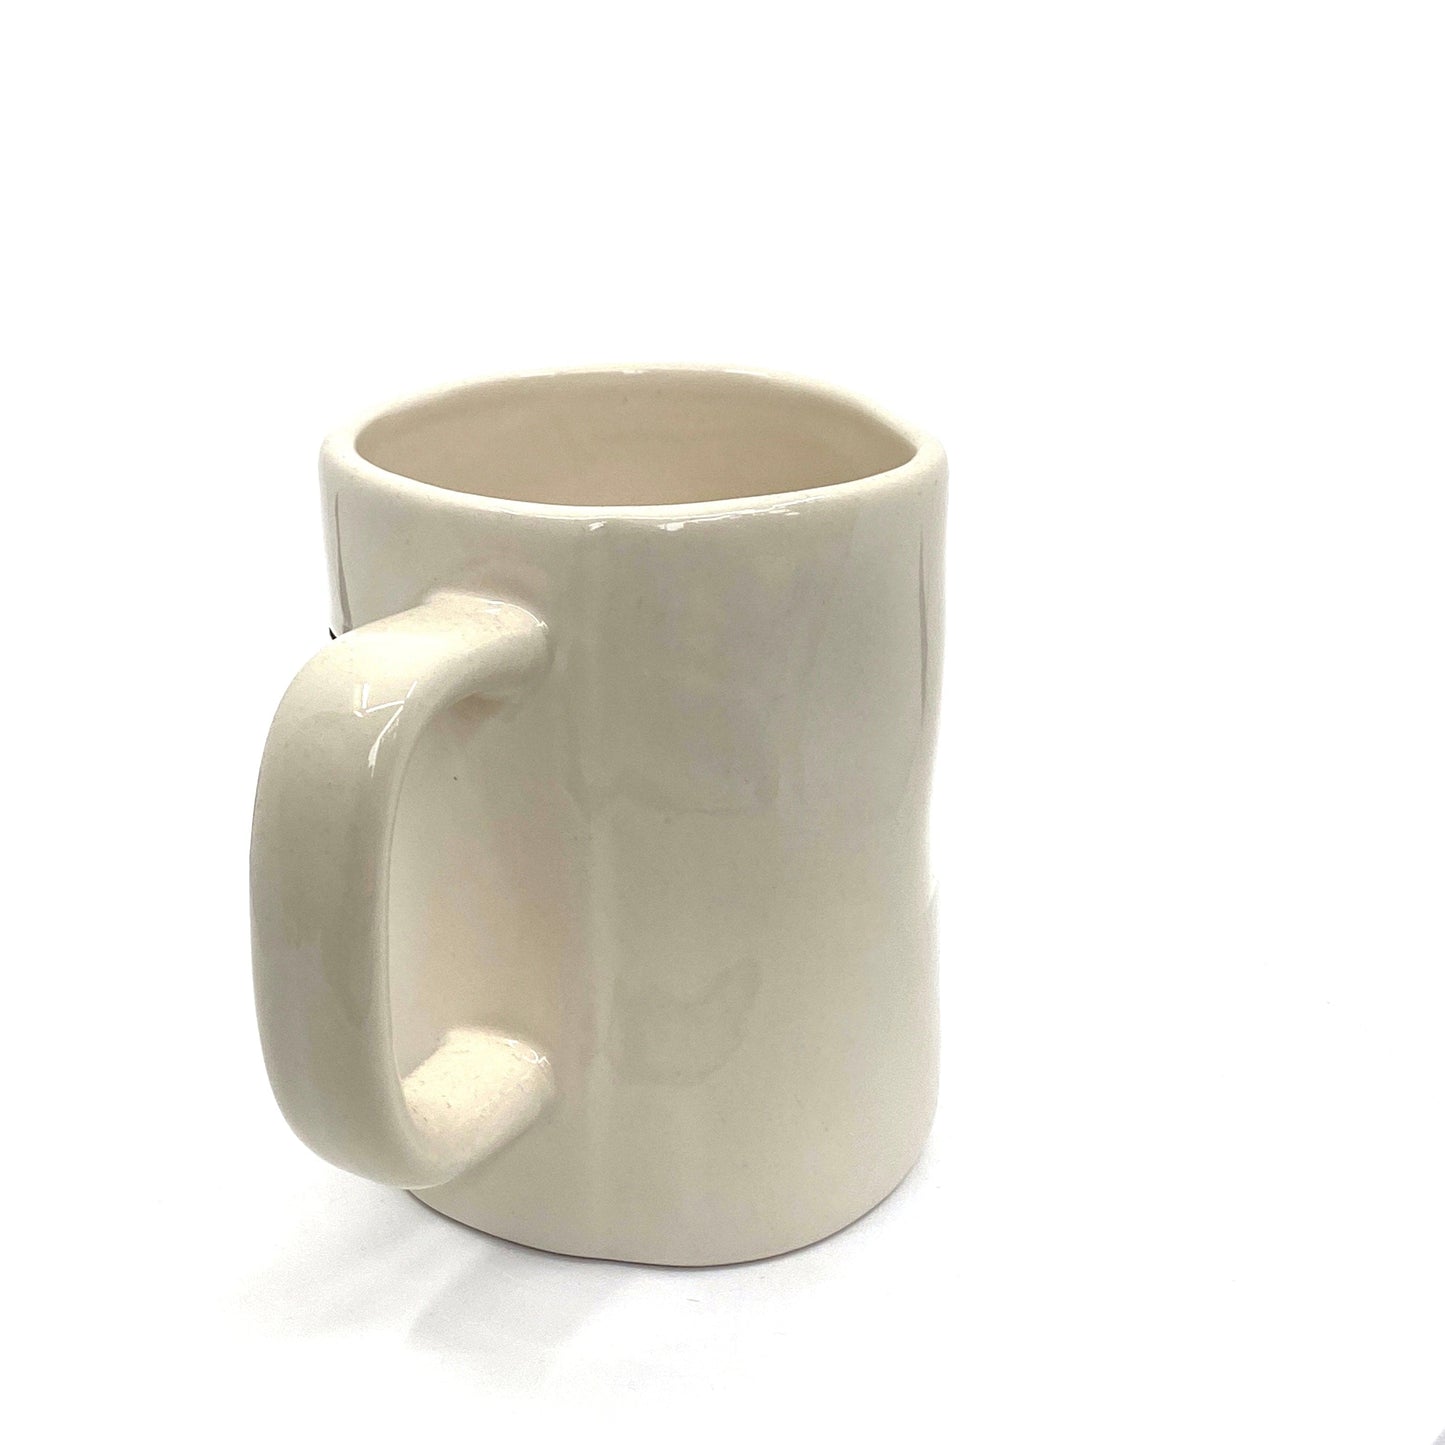 Rae Dunn Artisan Collection ‘BRILLIANT’ Large Letter White Coffee Cup Mug By Magenta